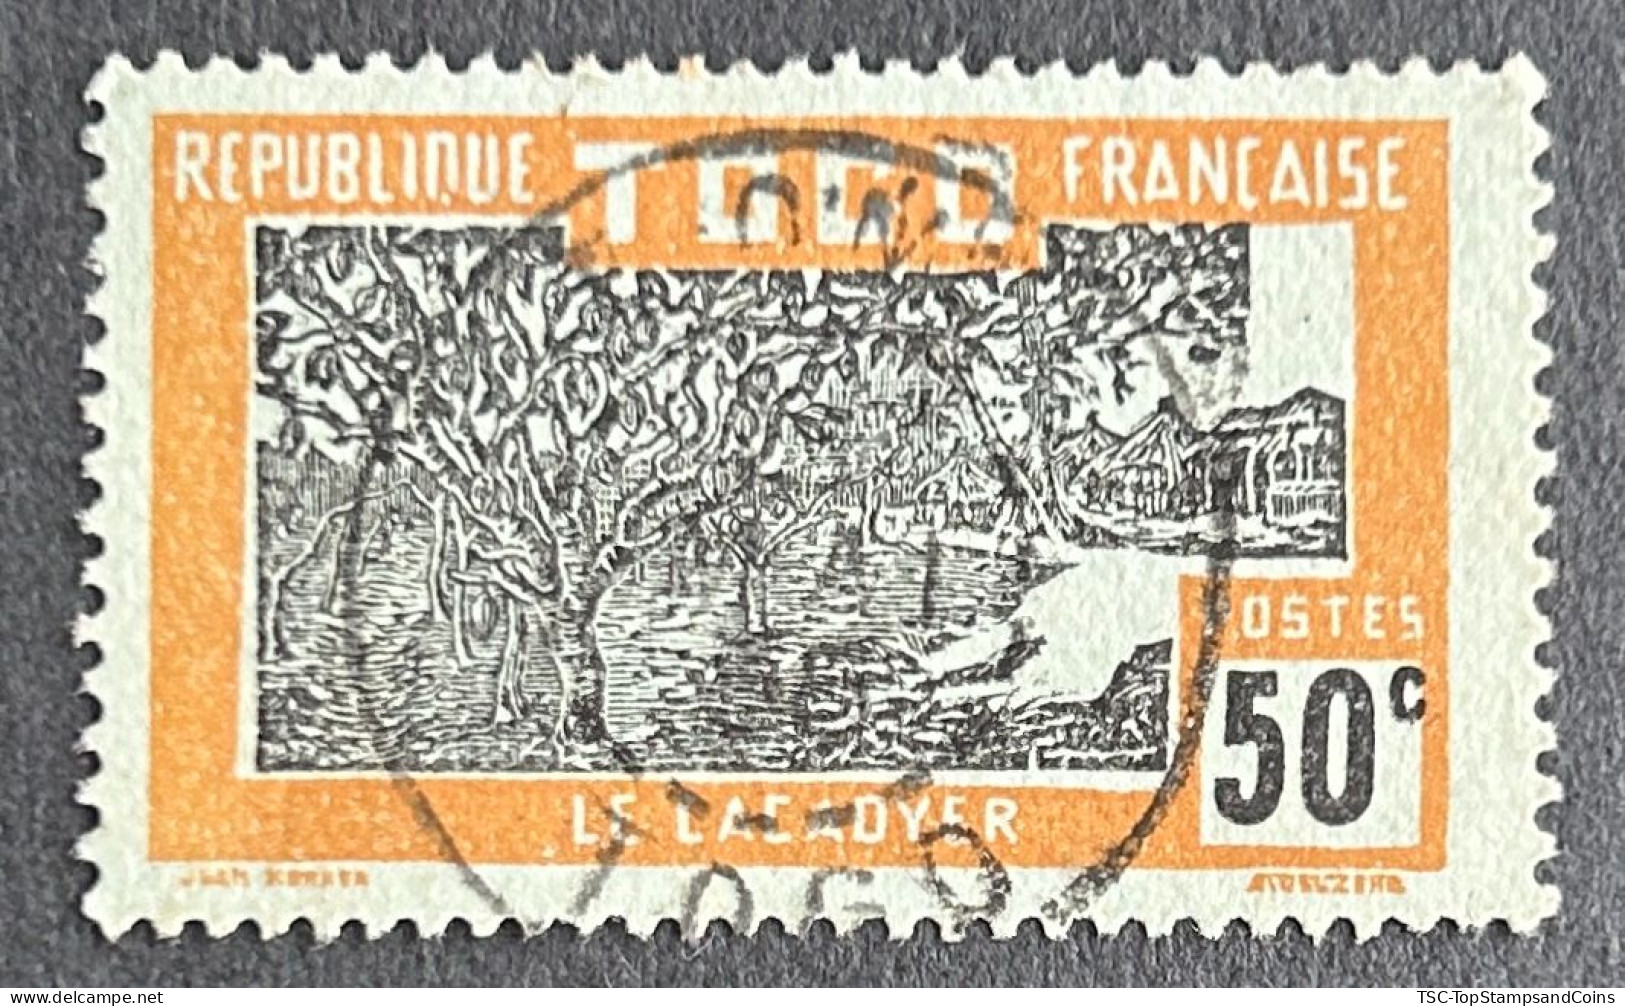 FRTG0136U1 - Agriculture - Cocoa Plantation - 50 C Used Stamp - French Togo - 1924 - Used Stamps